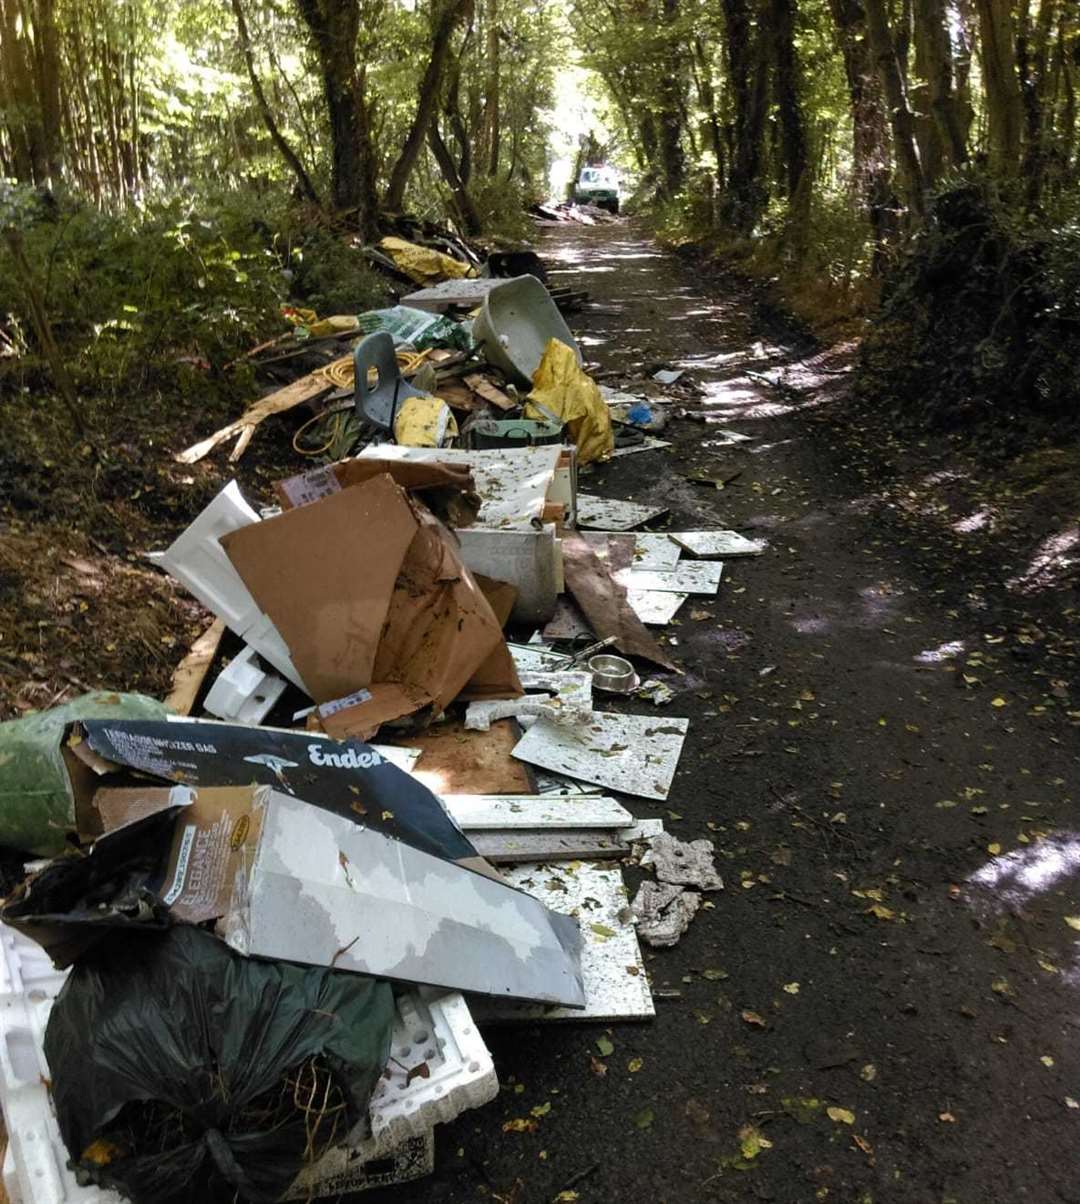 Rubbish fly-tipped by Clatworthy along School Lane in Fawkham